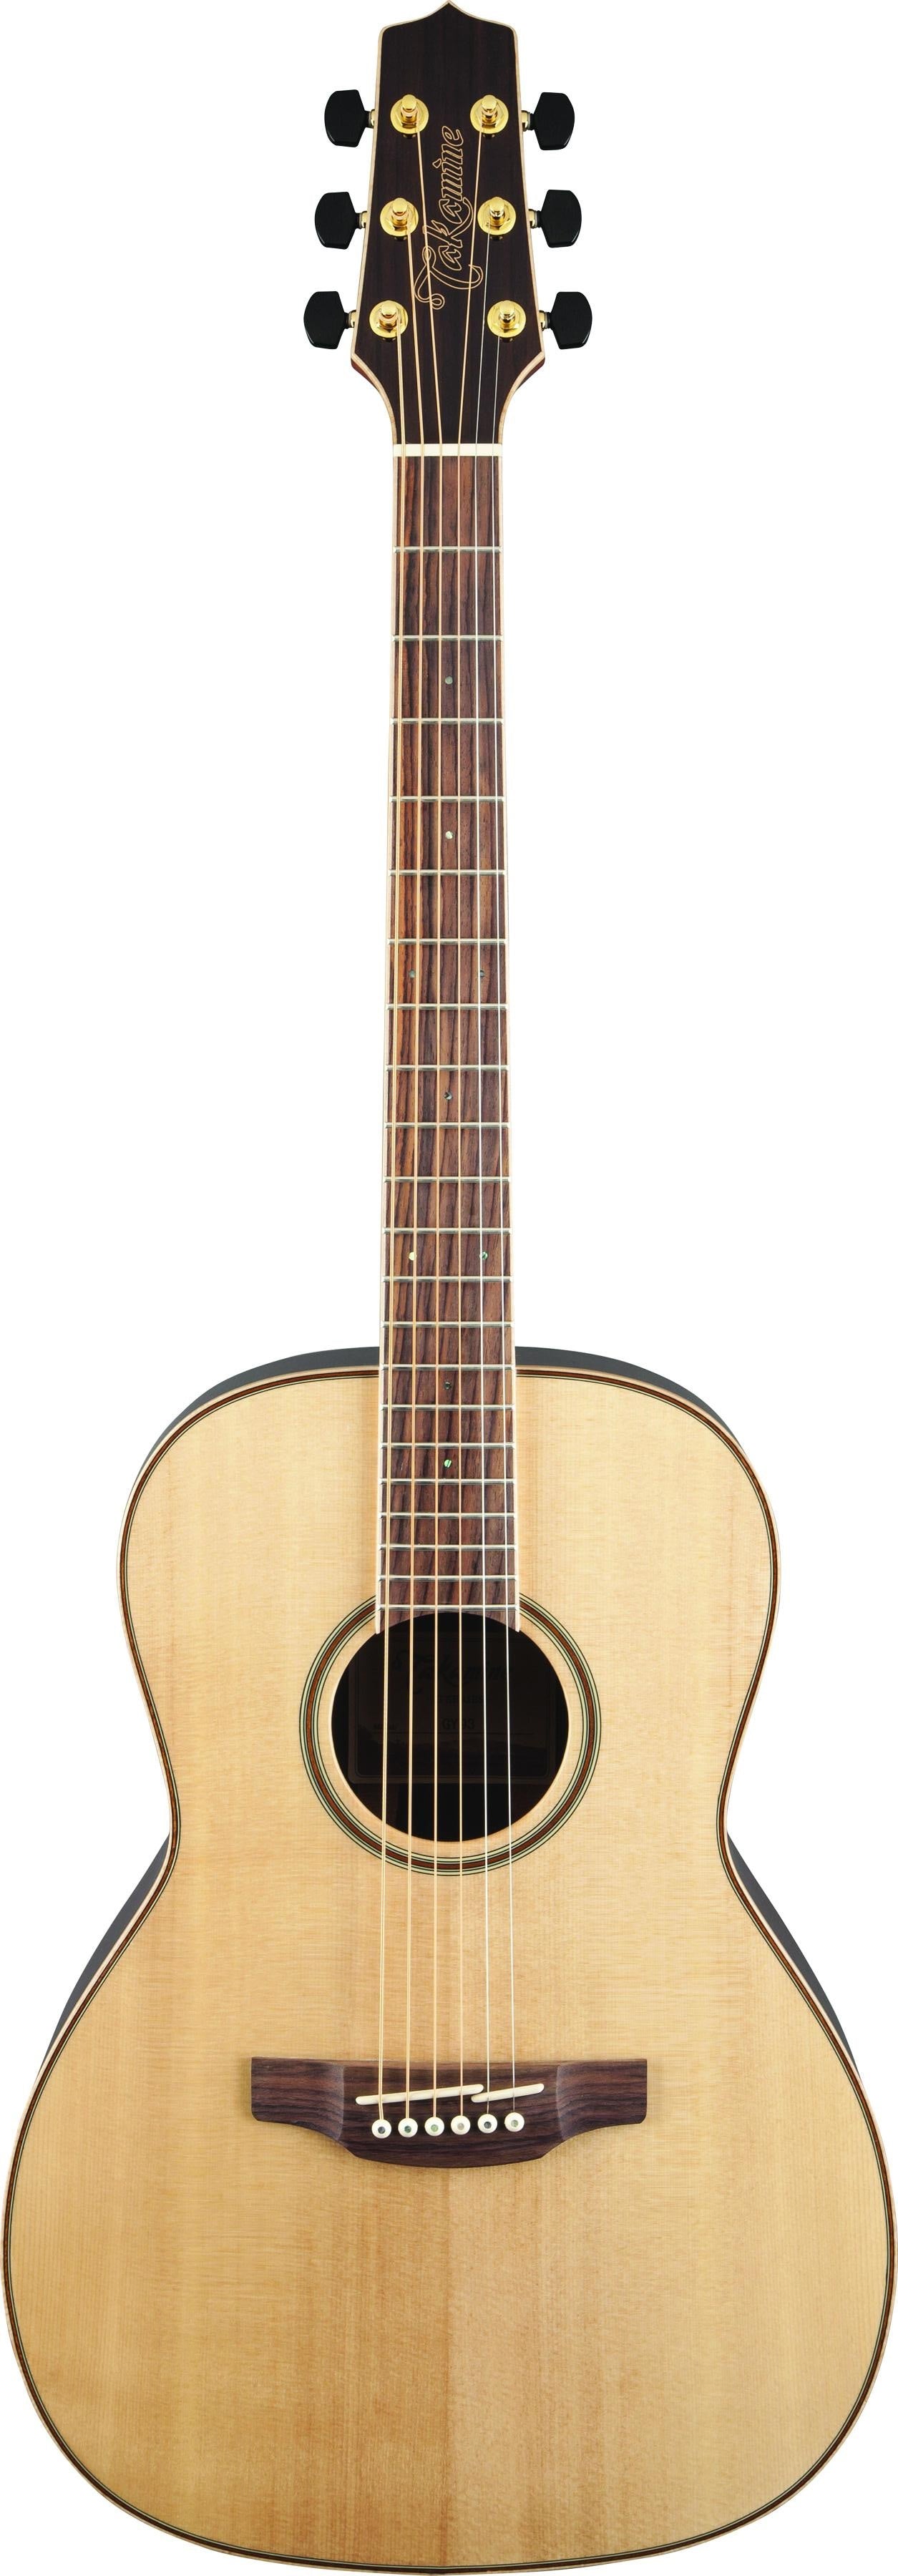 Takamine GY93E New Yorker Acoustic-Electric Guitar - Natural